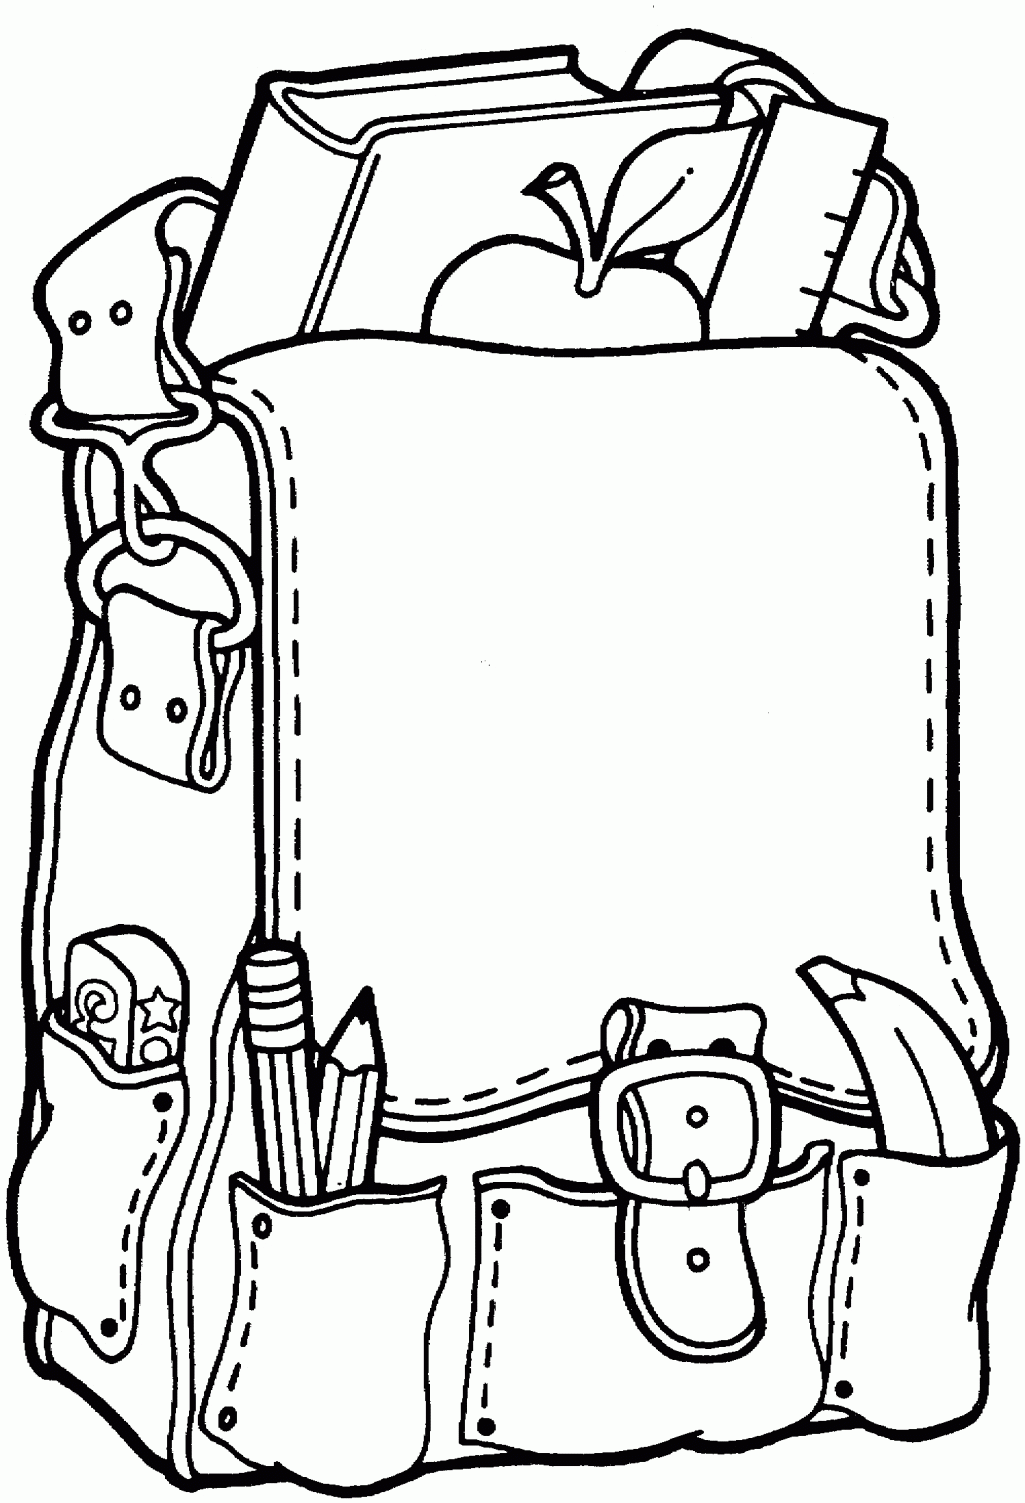 Welcome To School Coloring Page Coloring Home